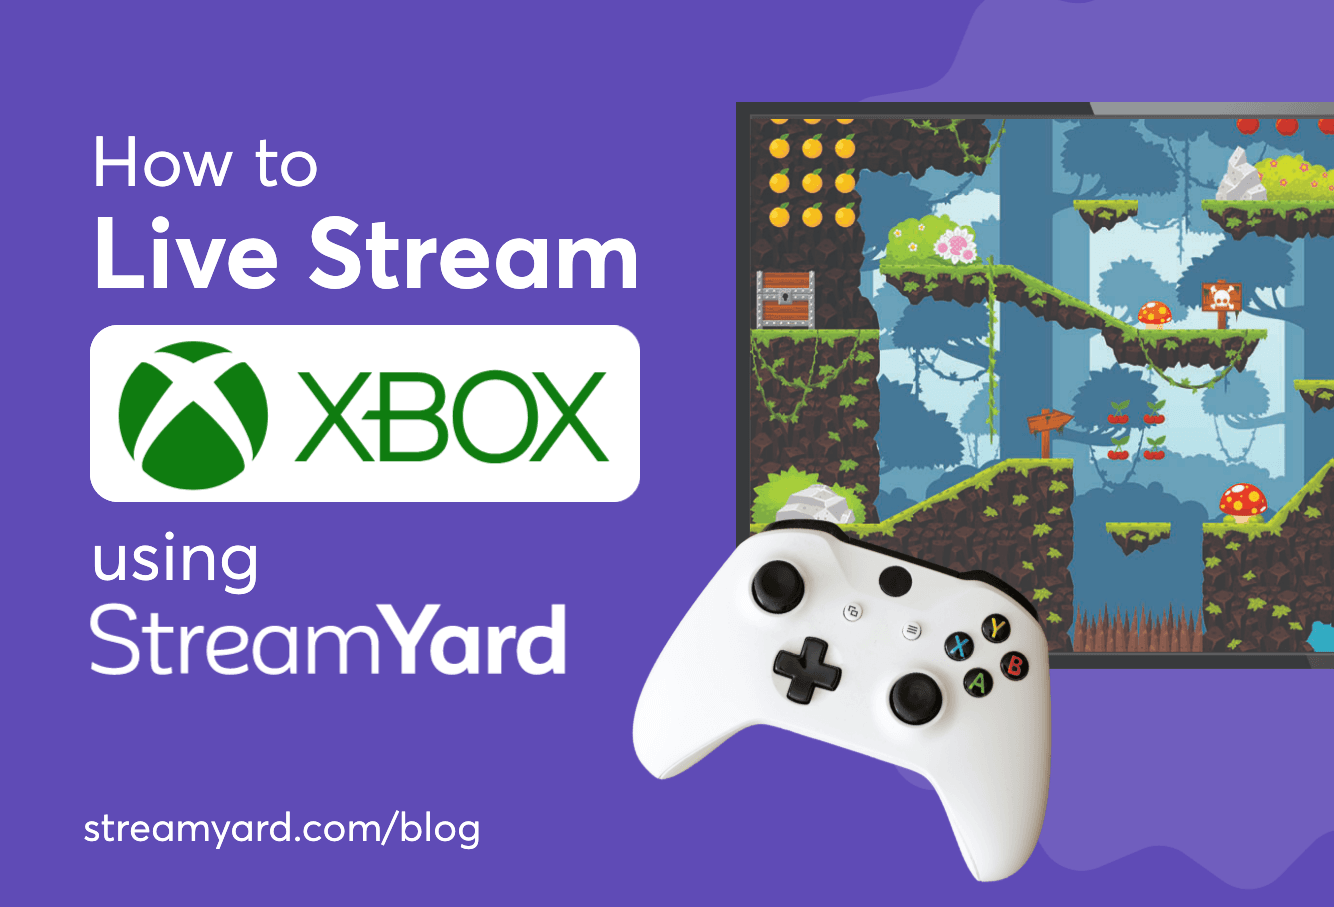 Find out what you need for live streaming games with Microsoft Xbox. Also, learn how to live stream Xbox using StreamYard. 